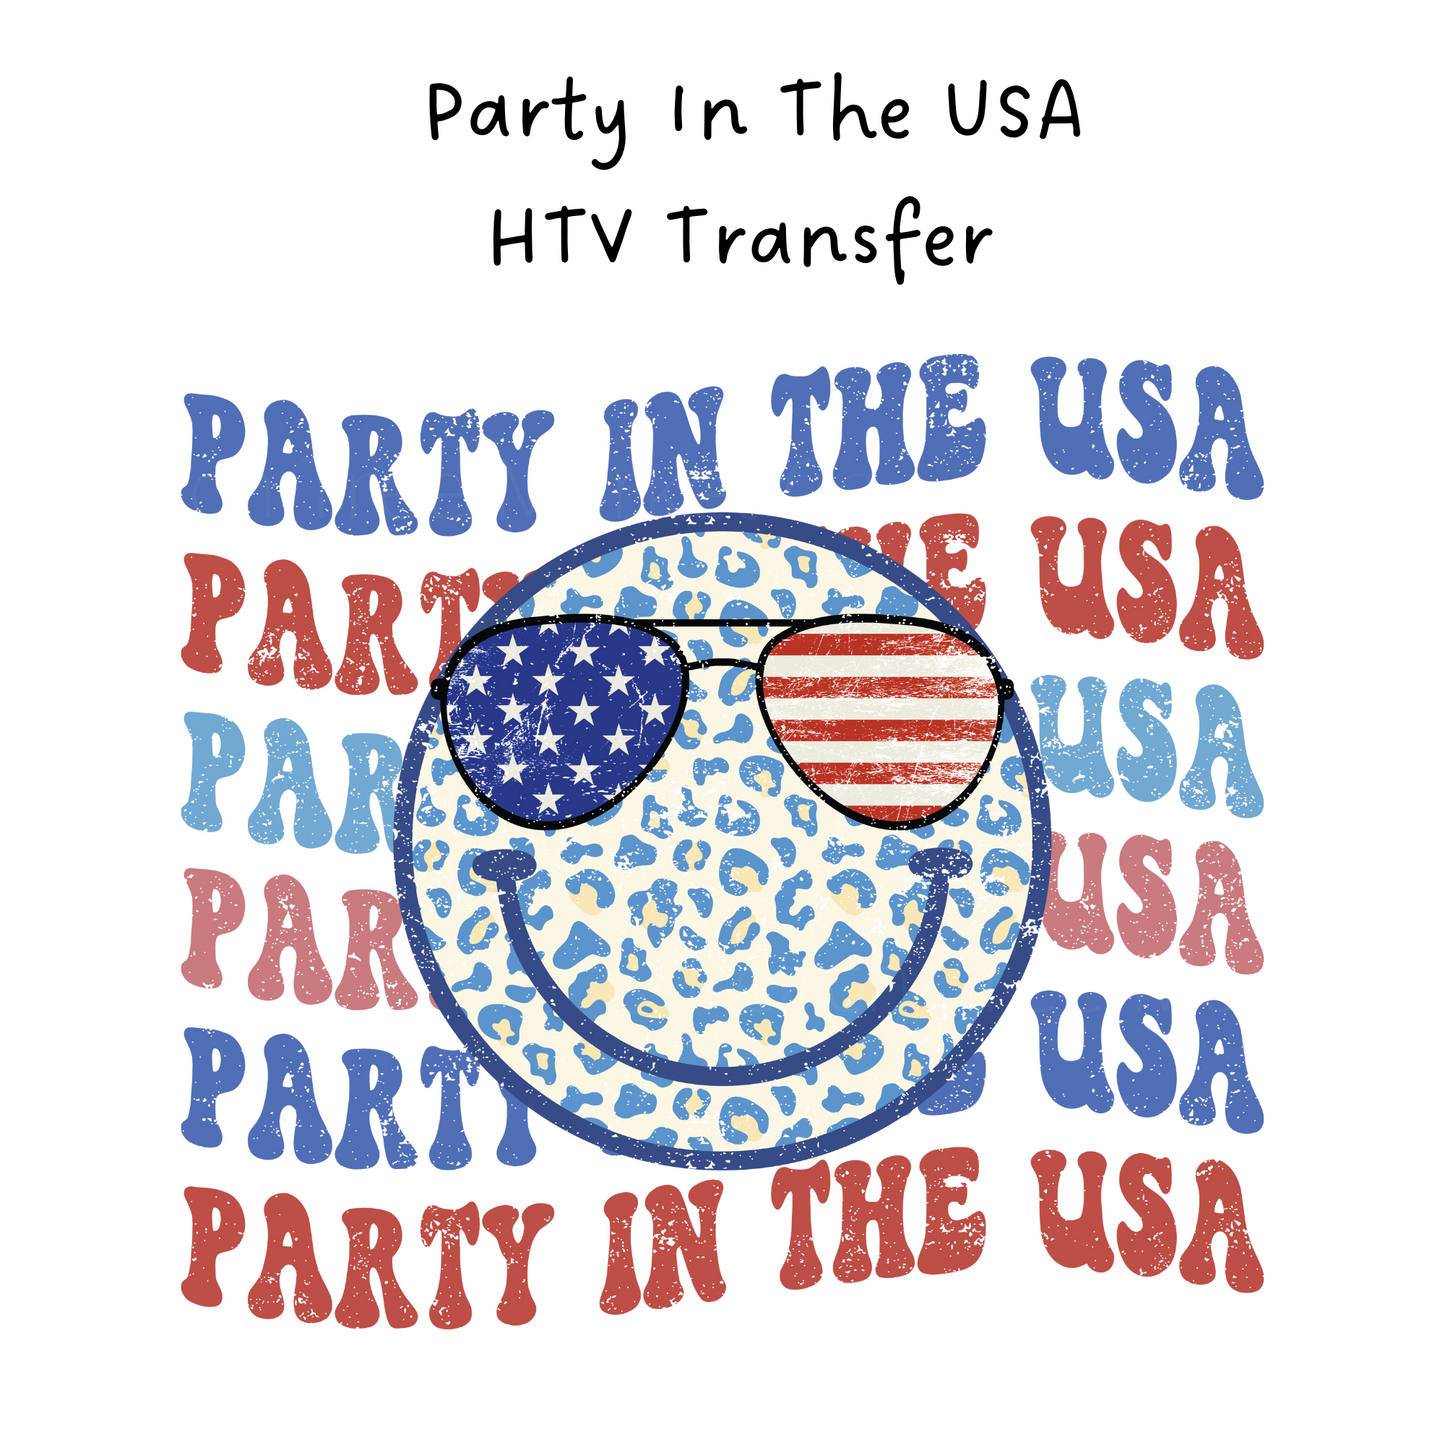 Party In The USA HTV Transfer